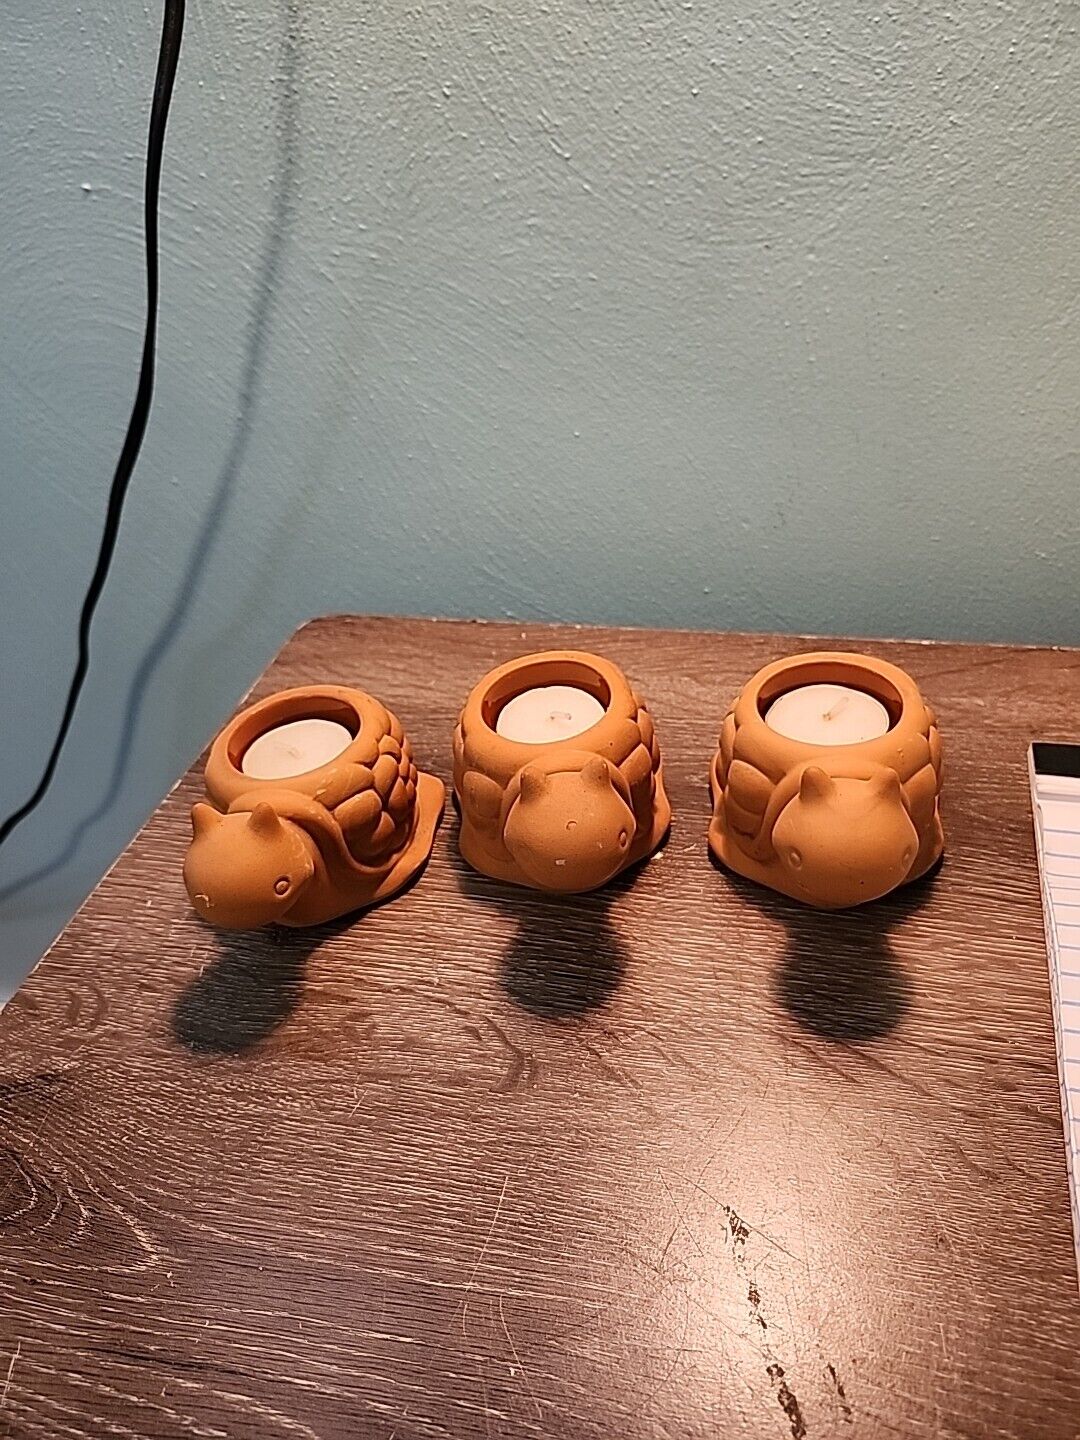 PartyLite Wee Three Terra Cotta Snail Tealight Holders ~ MINT  Pre-Owned ~  A38